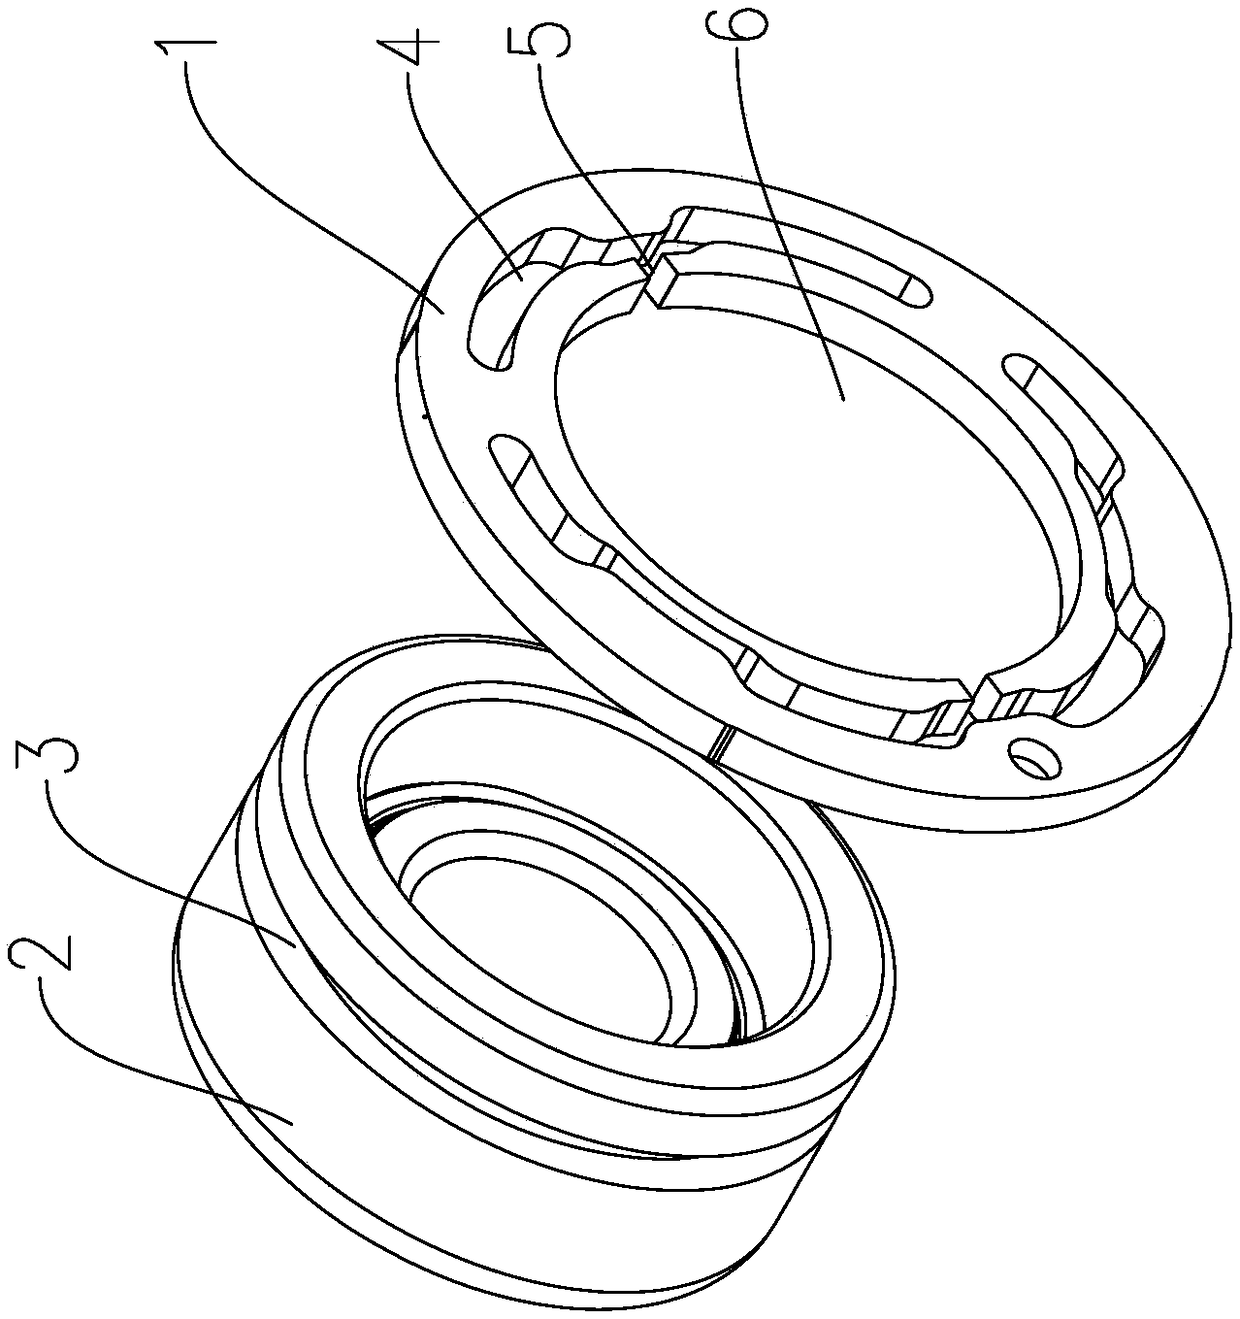 Elastic supporting bearing structure